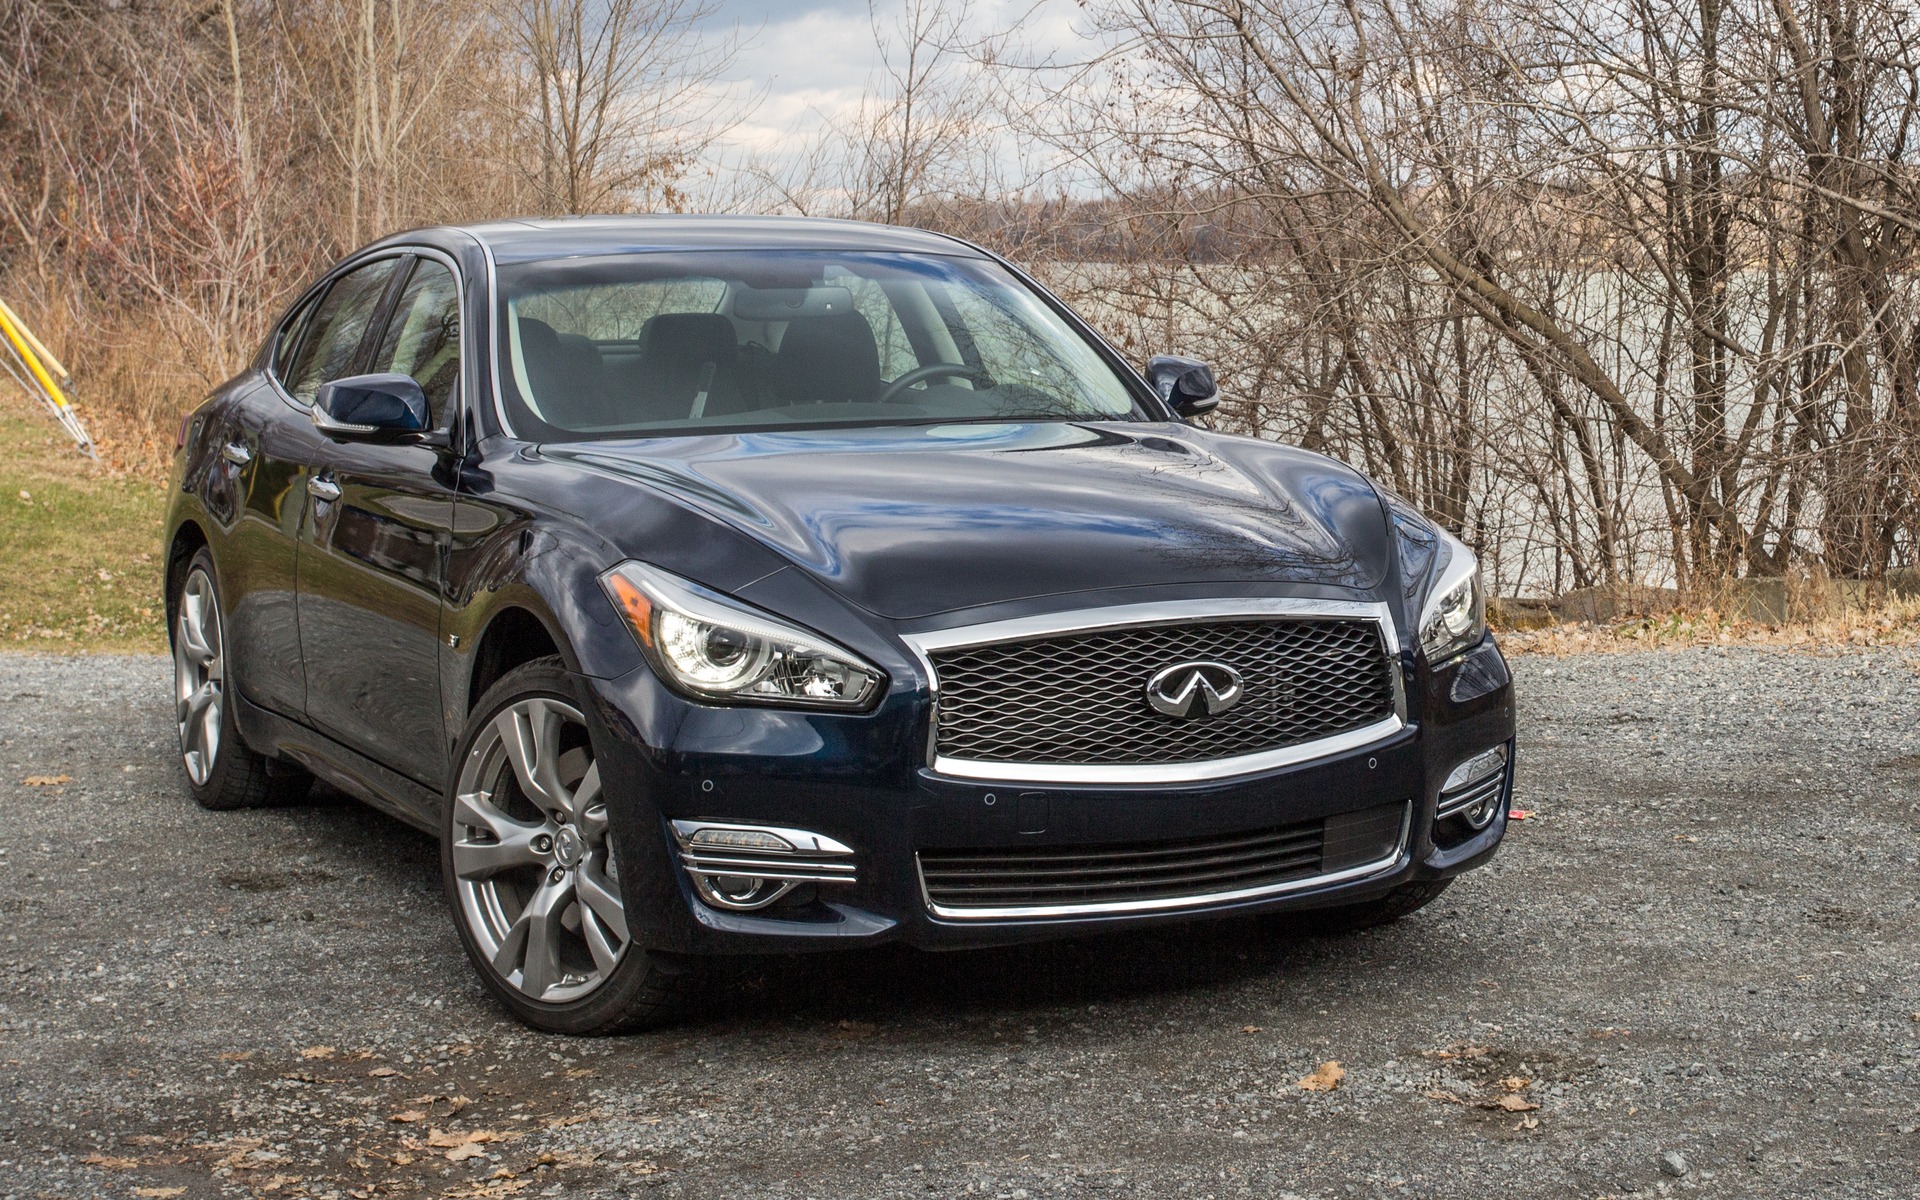 Styling changes reflect those made to its smaller sister, the Q50.